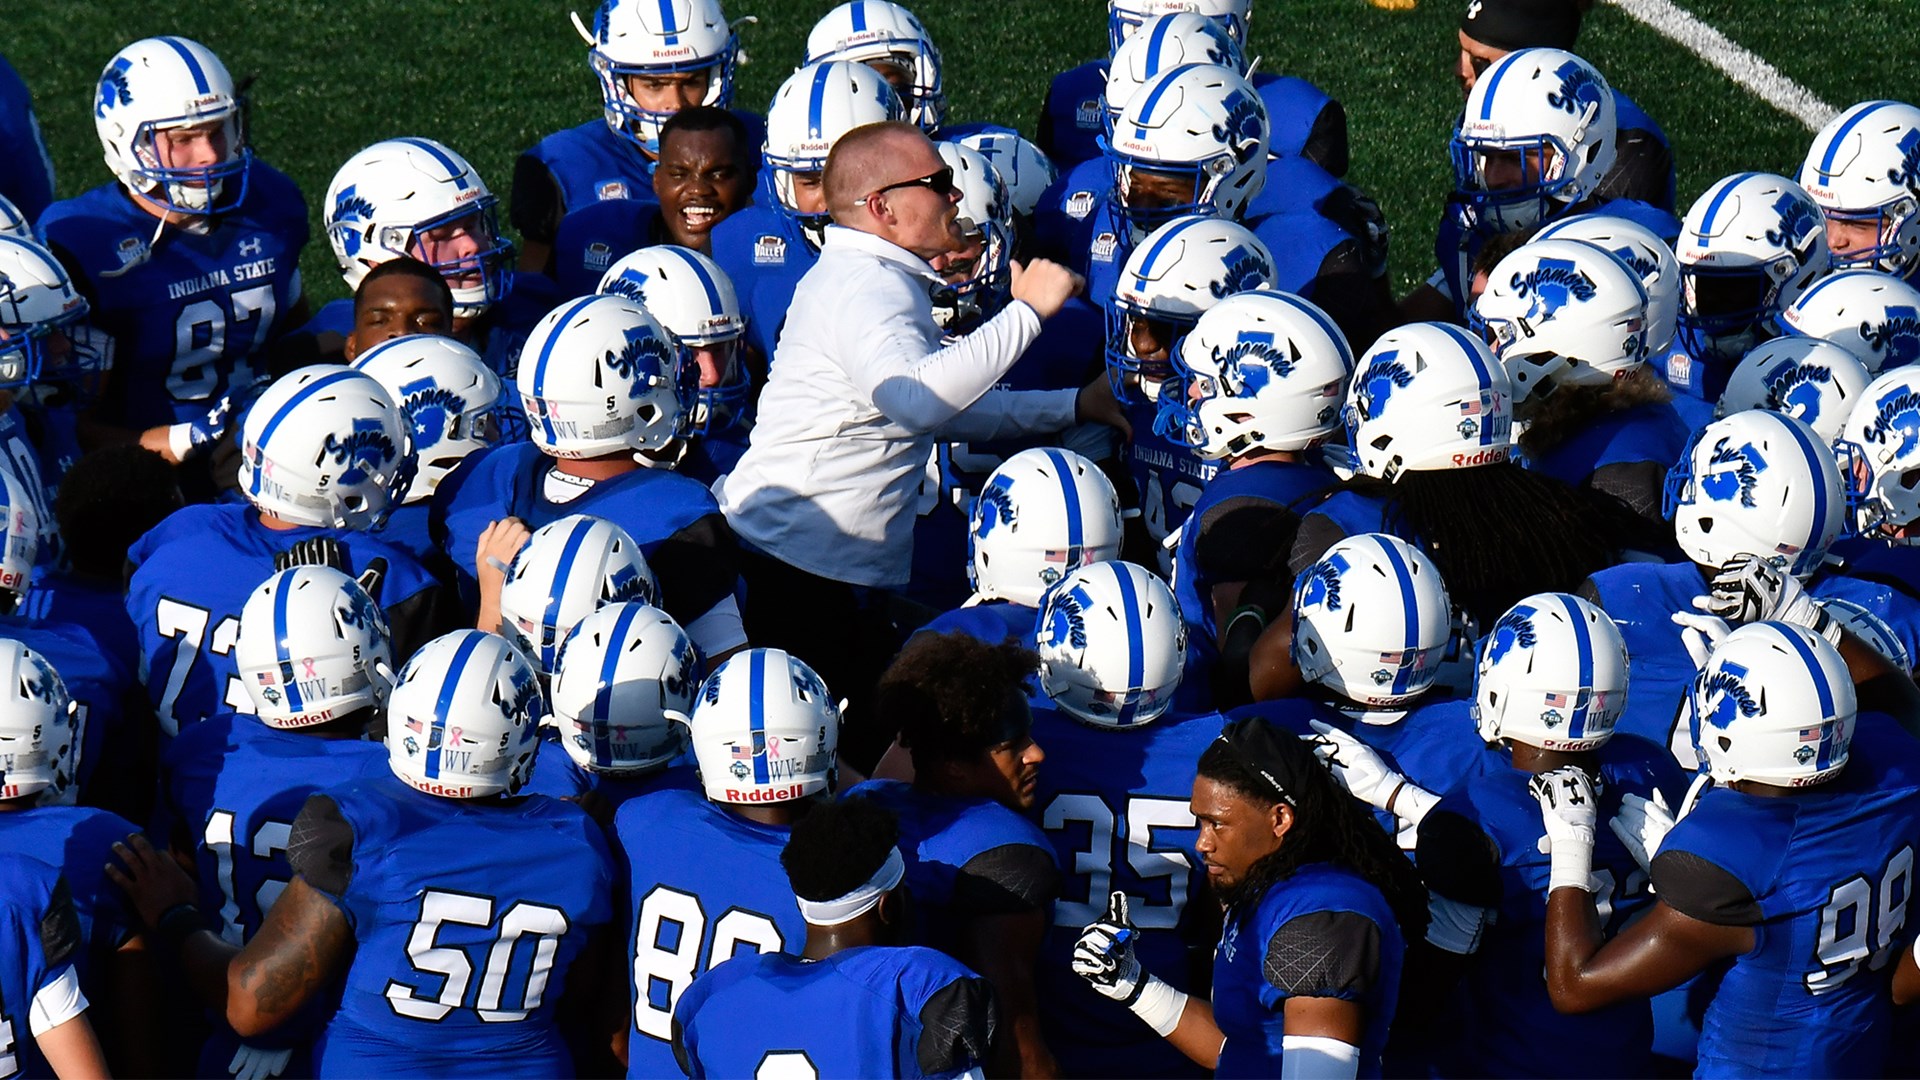 Indiana State Sycamores Set For Regional Rival Eastern Illinois